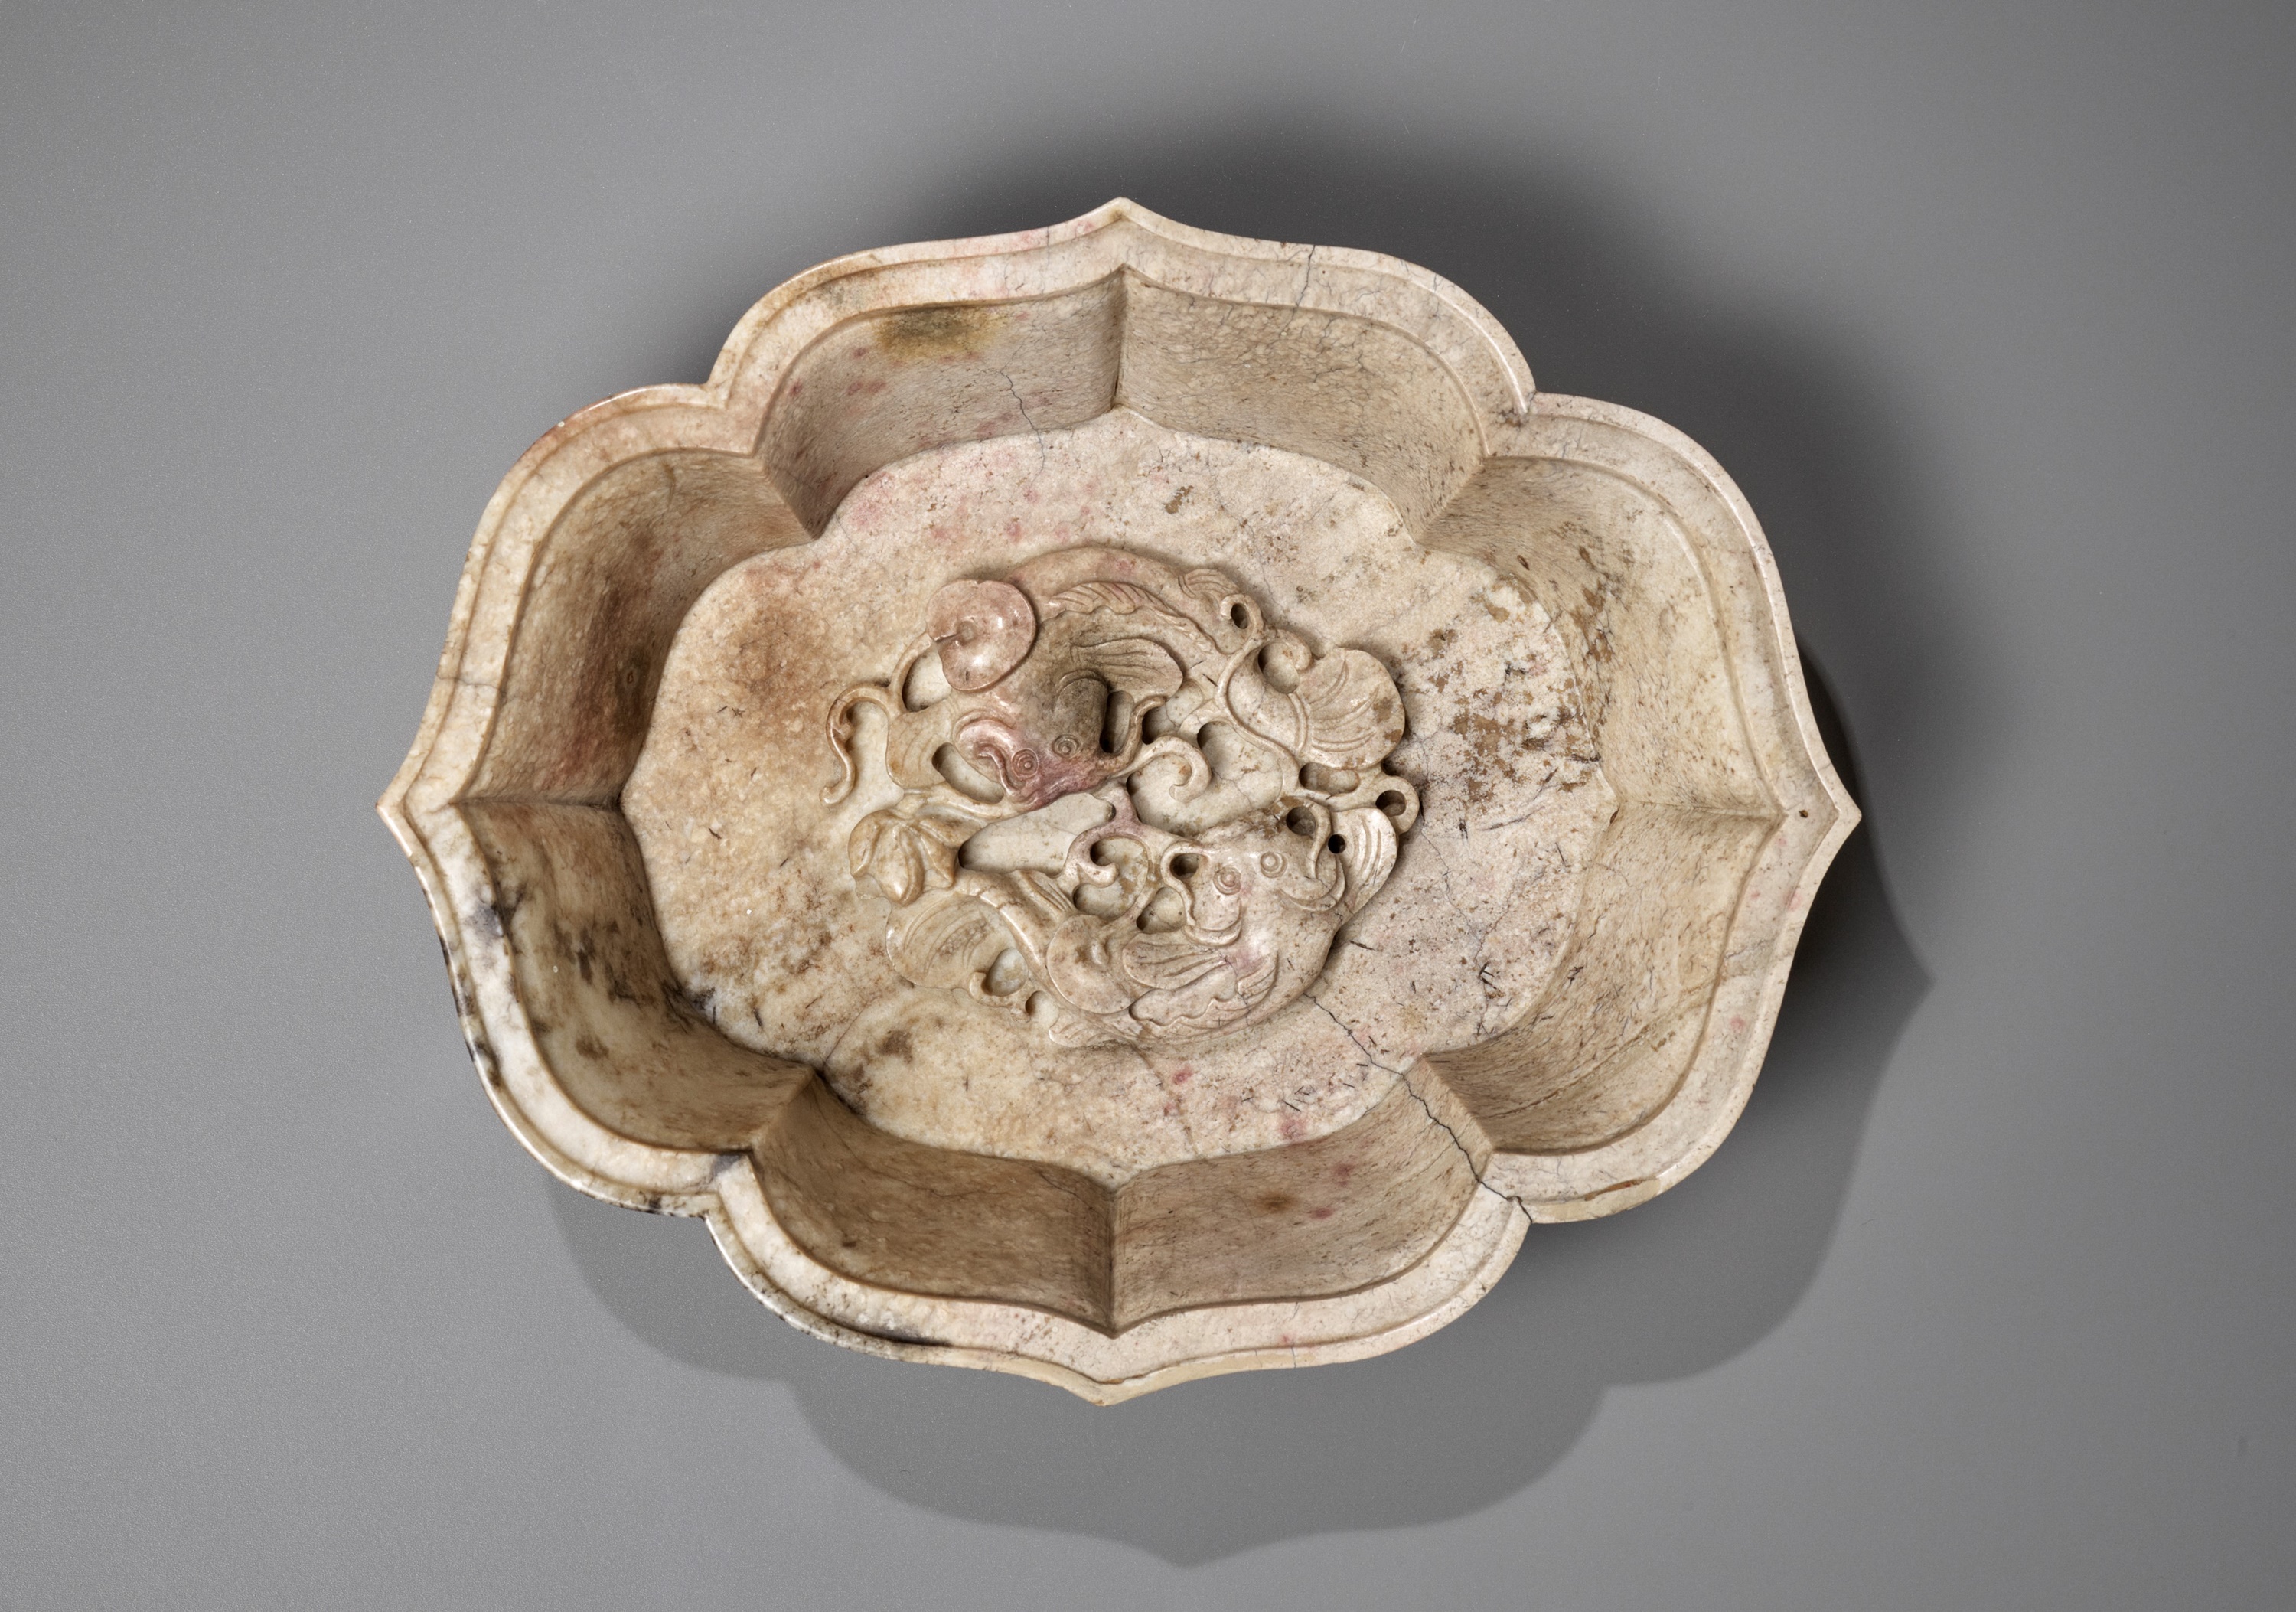 A CHICKEN BONE JADE 'DOUBLE FISH' MARRIAGE BOWL, 17TH-18TH CENTURY